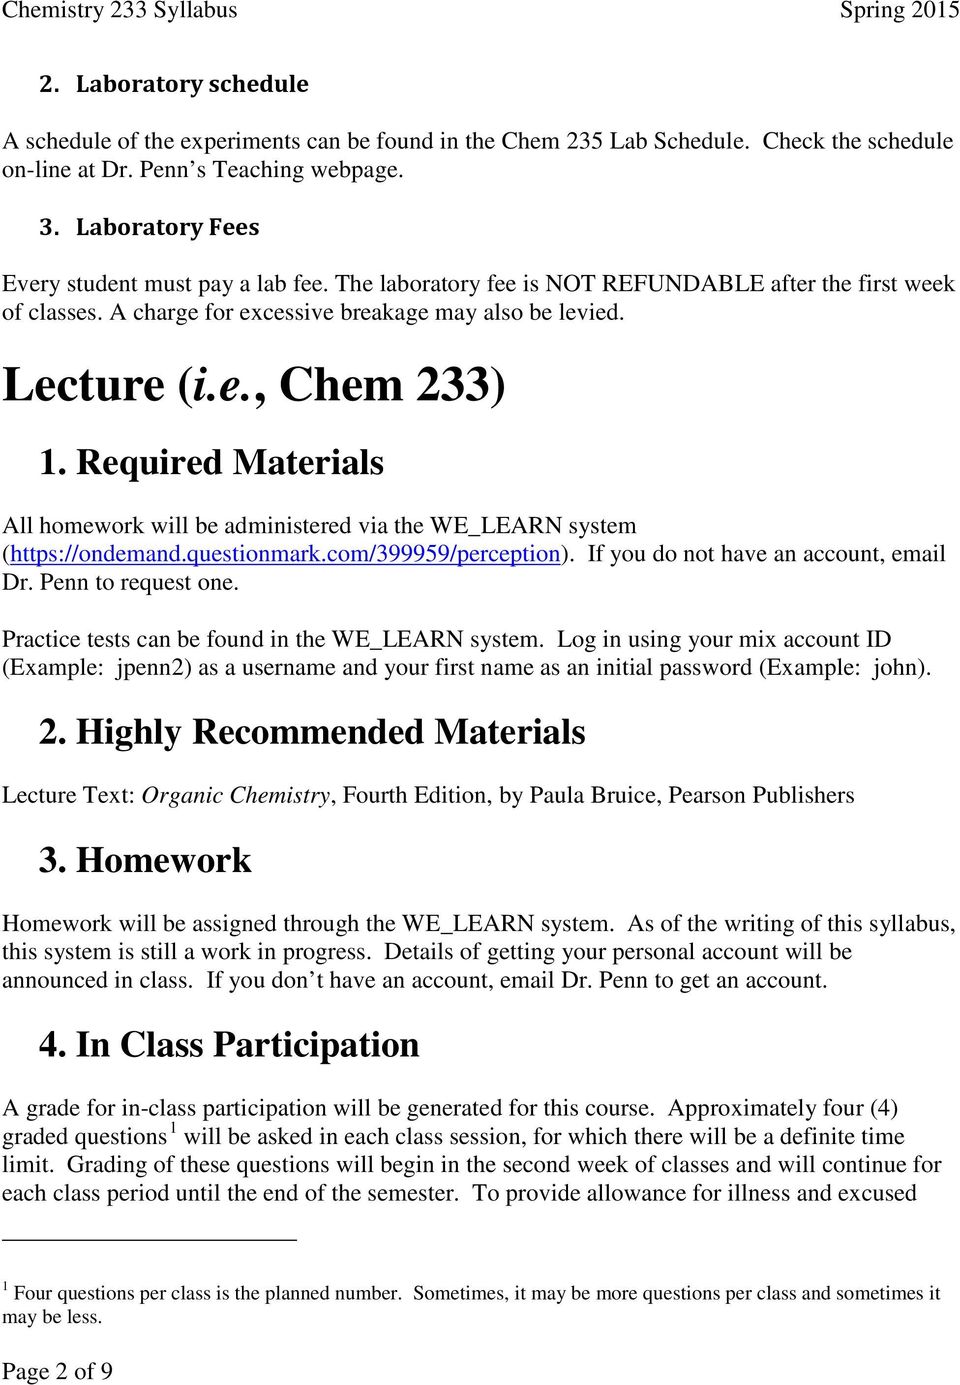 Required Materials All homework will be administered via the WE_LEARN system (https://ondemand.questionmark.com/399959/perception). If you do not have an account, email Dr. Penn to request one.